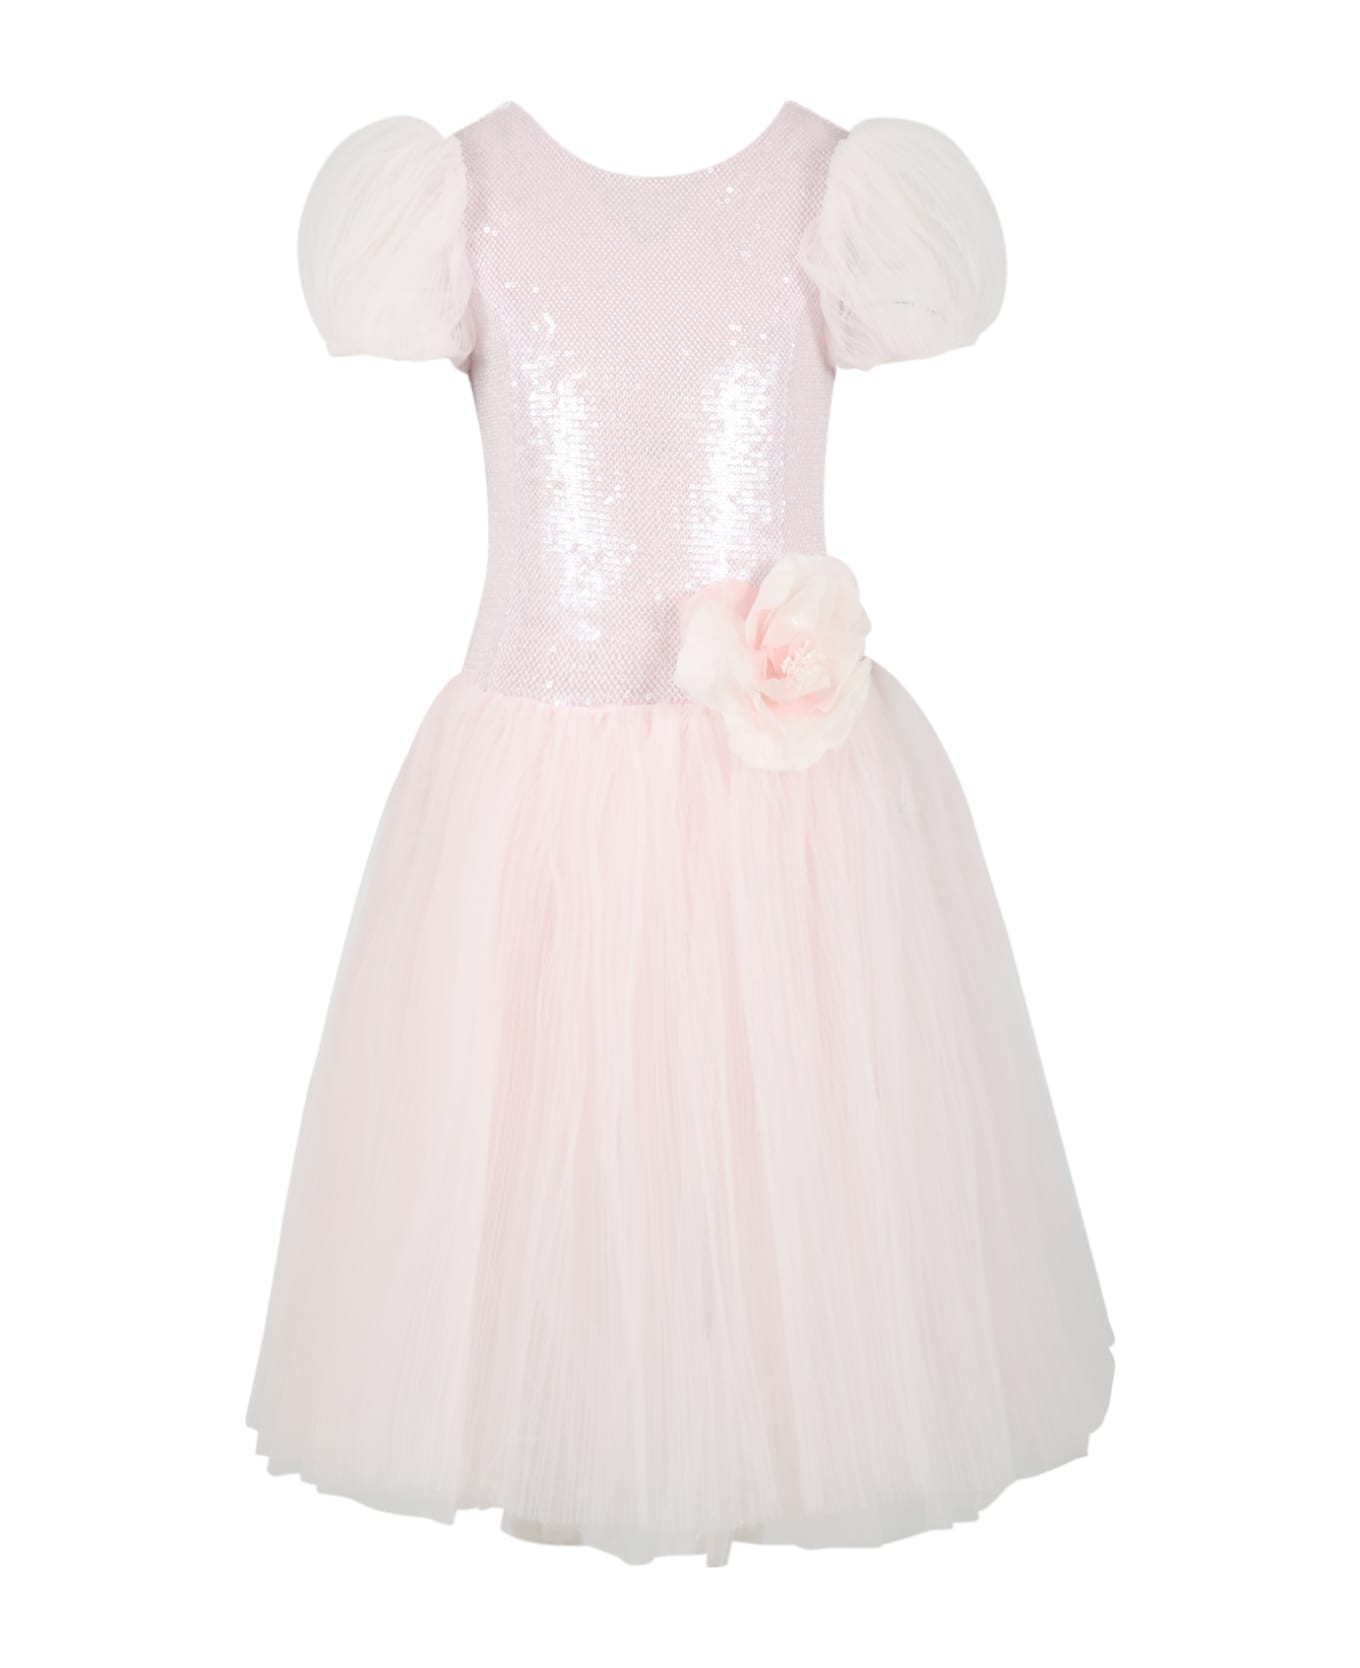 Monnalisa Pink Dress For Girl With Flowers - Pink ワンピース＆ドレス